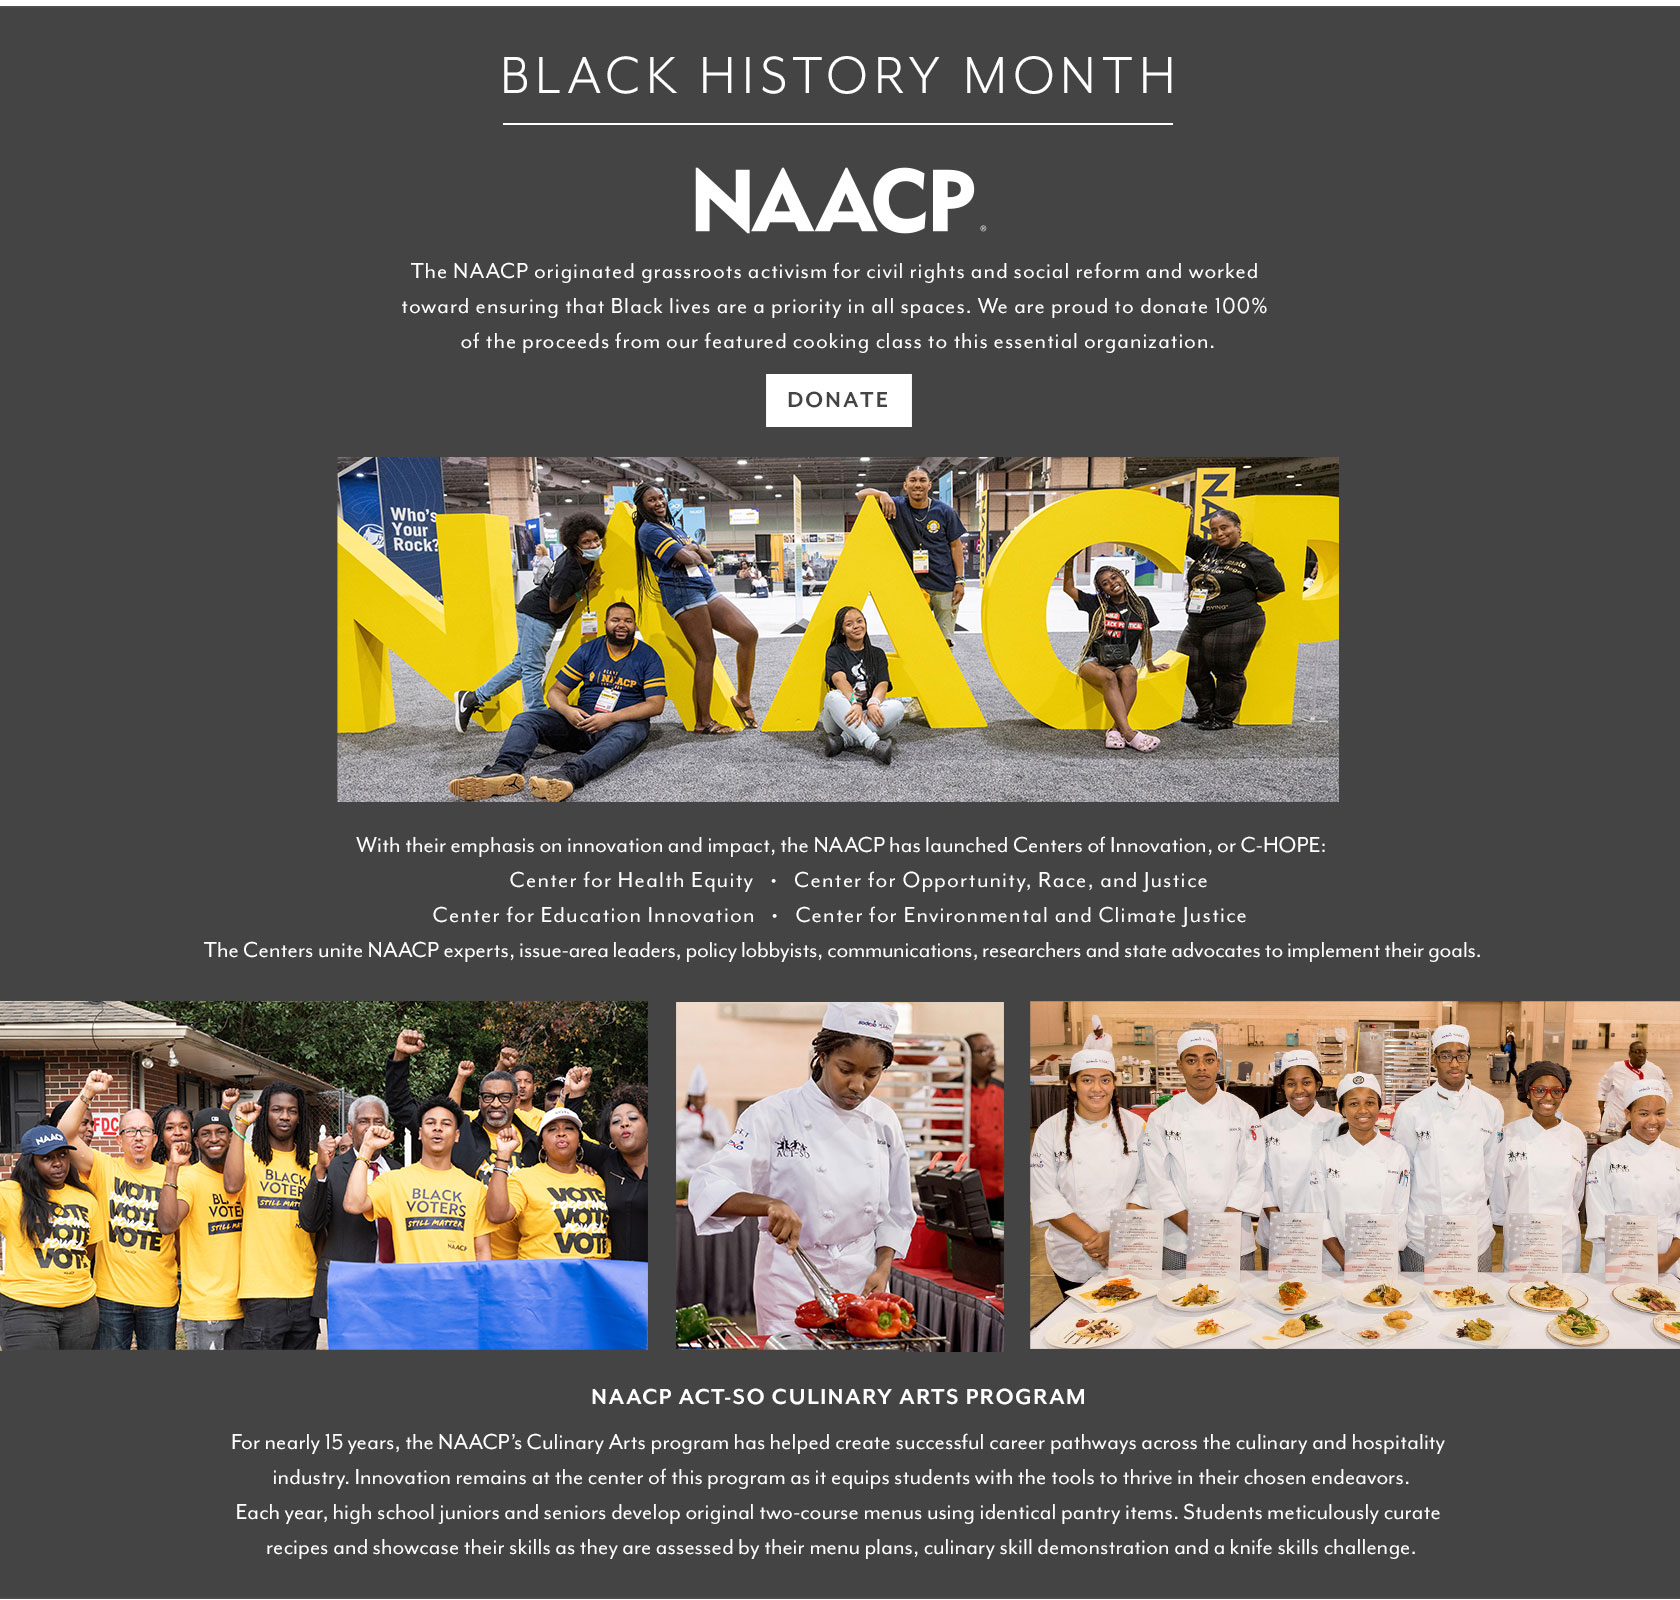 BLACK HISTORY MONTH. The NAACP originated grassroots activism for civil rights and social reform and works toward ensuring that Black lives are a priority in all spaces. Sur La Table is proud to donate 100% of the proceeds from our featured cooking class to this essential organization. With their emphasis on innovation and impact, the NAACP has launched Centers of Innovation, or C-HOPE: Center for Health Equity; Center for Opportunity, Race, and Justice; Center for Education Innovation; and Center for Environmental and Climate Justice. The Centers unite NAACP experts, issue-area leaders, policy, lobbyists, communications, researchers and state advocates to implement their goals. NAACP ACT-SO Culinary Arts program. For nearly 15 years, the NAACP's Culinary Arts program has helped create successful career pathways across the culinary and hospitality industry. Innovation remains at the center of the program as it equips students with the tools to thrive in their chosen endeavors. Each year, high school juniors and seniors develop original two-course menus using identical pantry items. Students meticulously curate recipes and showcase their skills as they are assessed by their menu plans, culinary skill demonstration and a knife skills challenge.